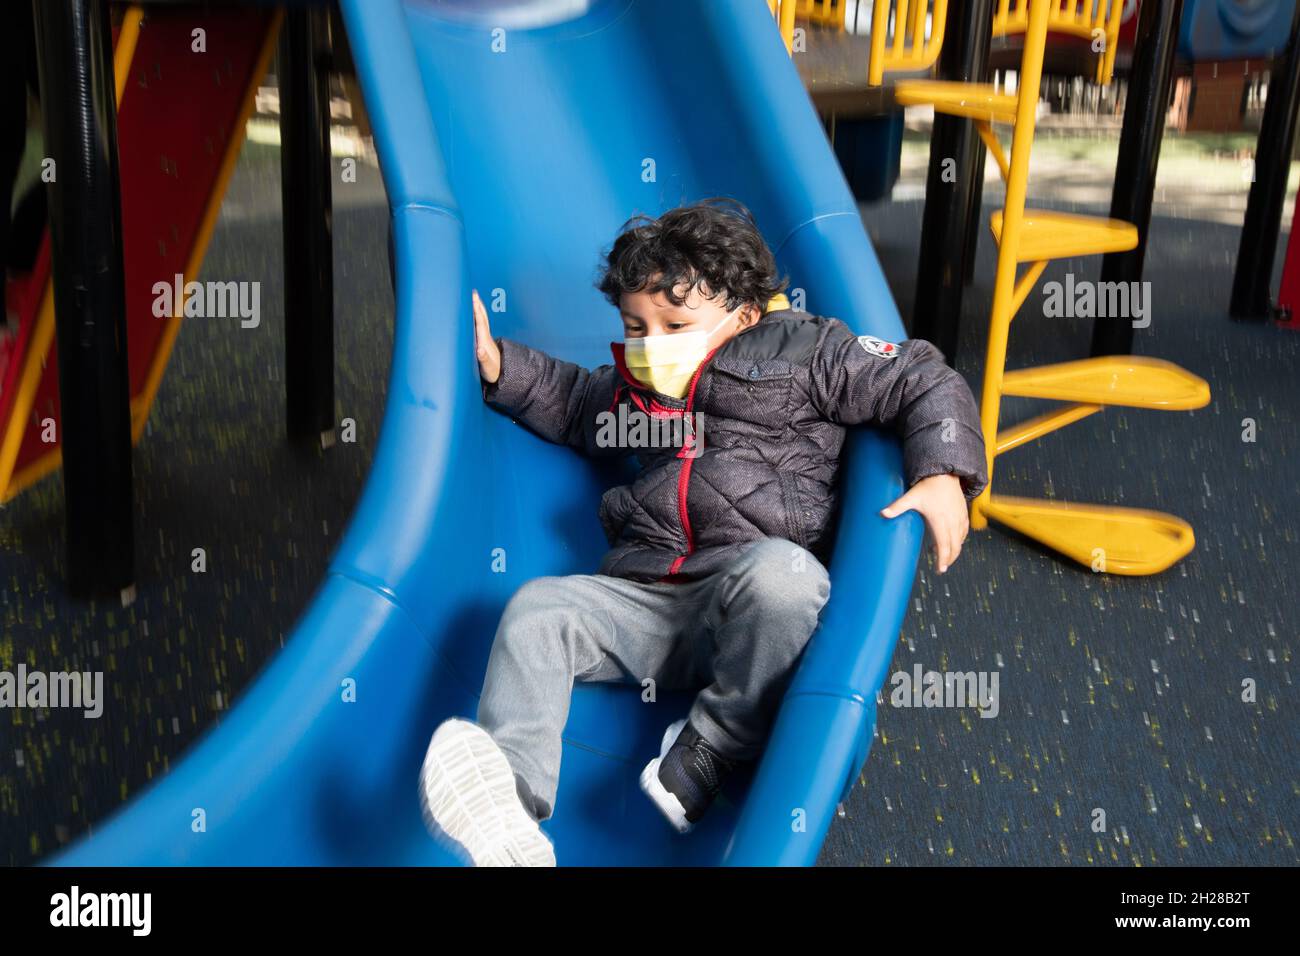 Education Preschool 4-5 year olds playground boy sliding down slide, wearing face mask to protect against Covid-19 infection Stock Photo